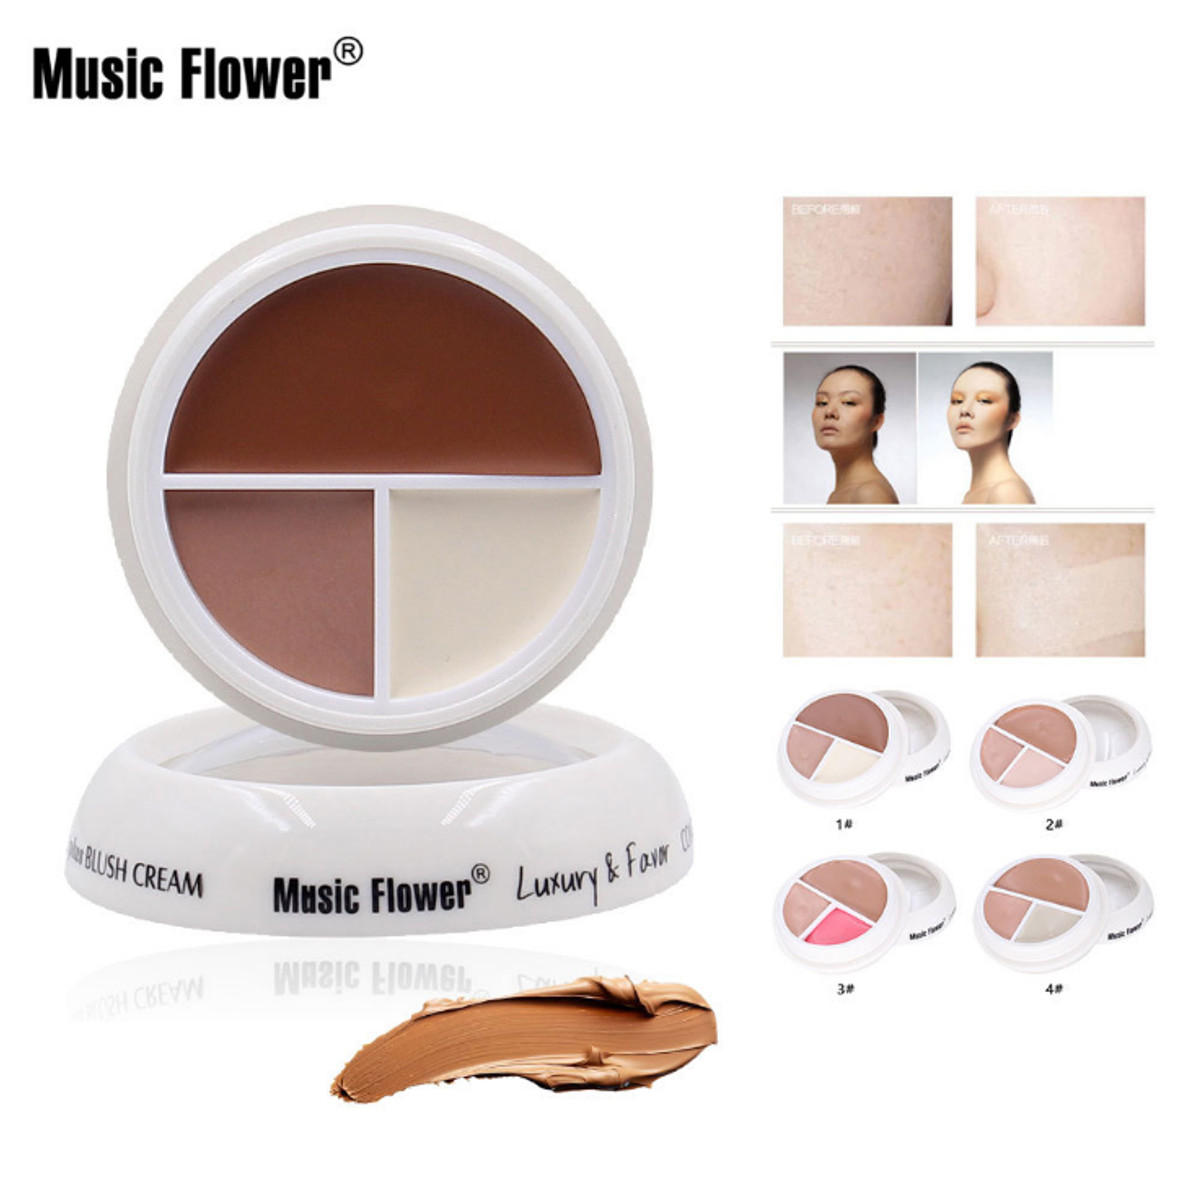 usic Flower Full Cover 3 In 1 Press Concealer Cream Face Smooth Waterproof Sweat-proof Long-lasting 